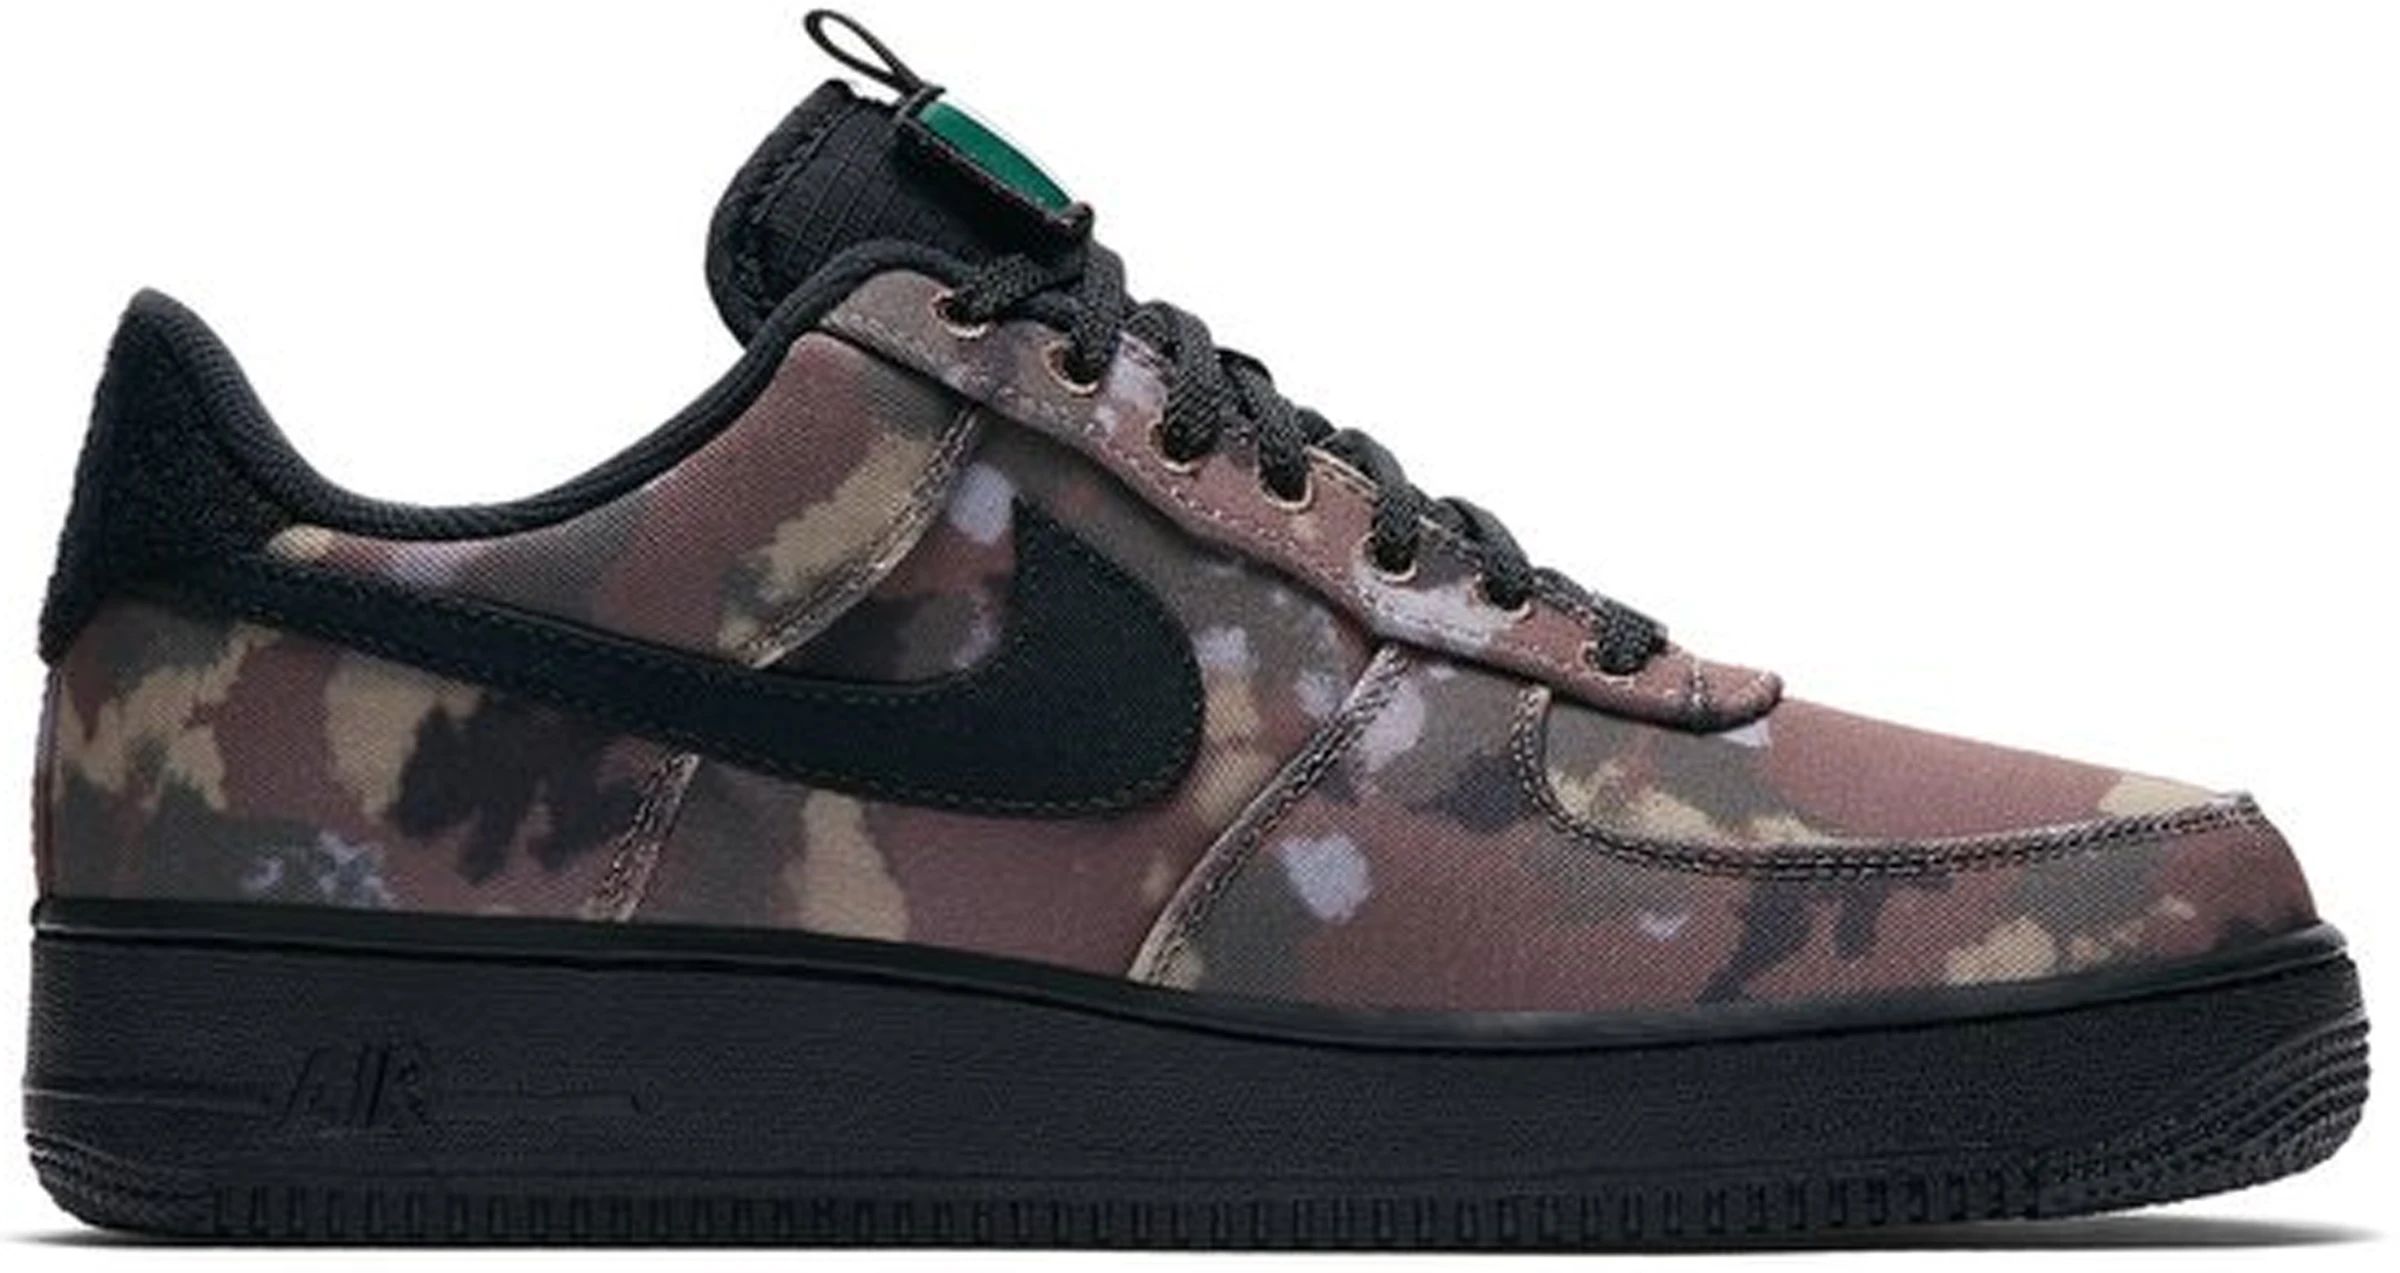 Force 1 Low Country Camo - AV7012-200 - ES